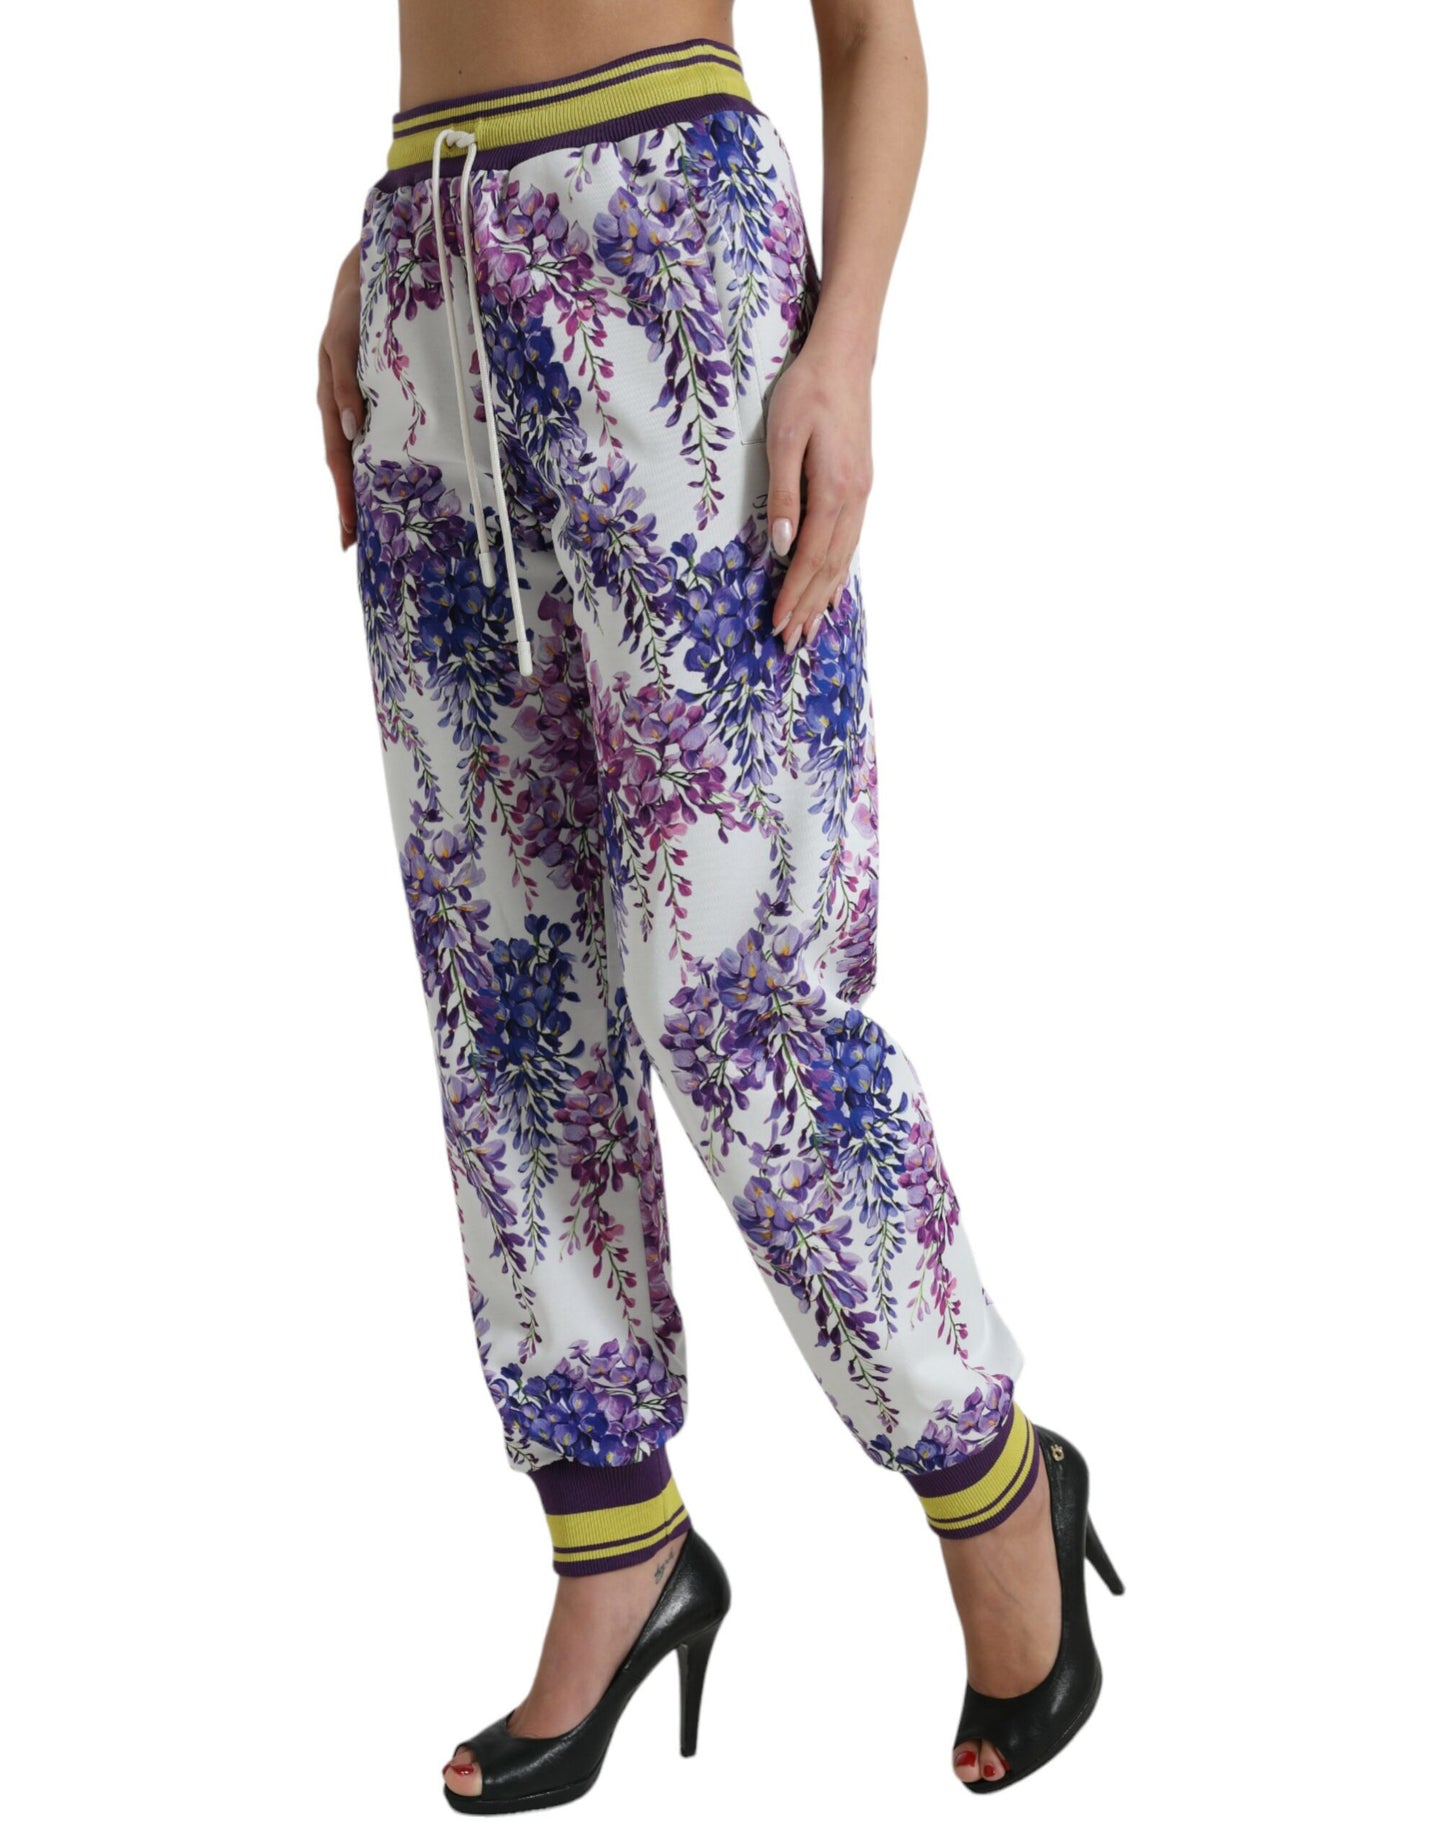 Dolce & Gabbana Elegant Floral Jogger Pants for a Chic Look